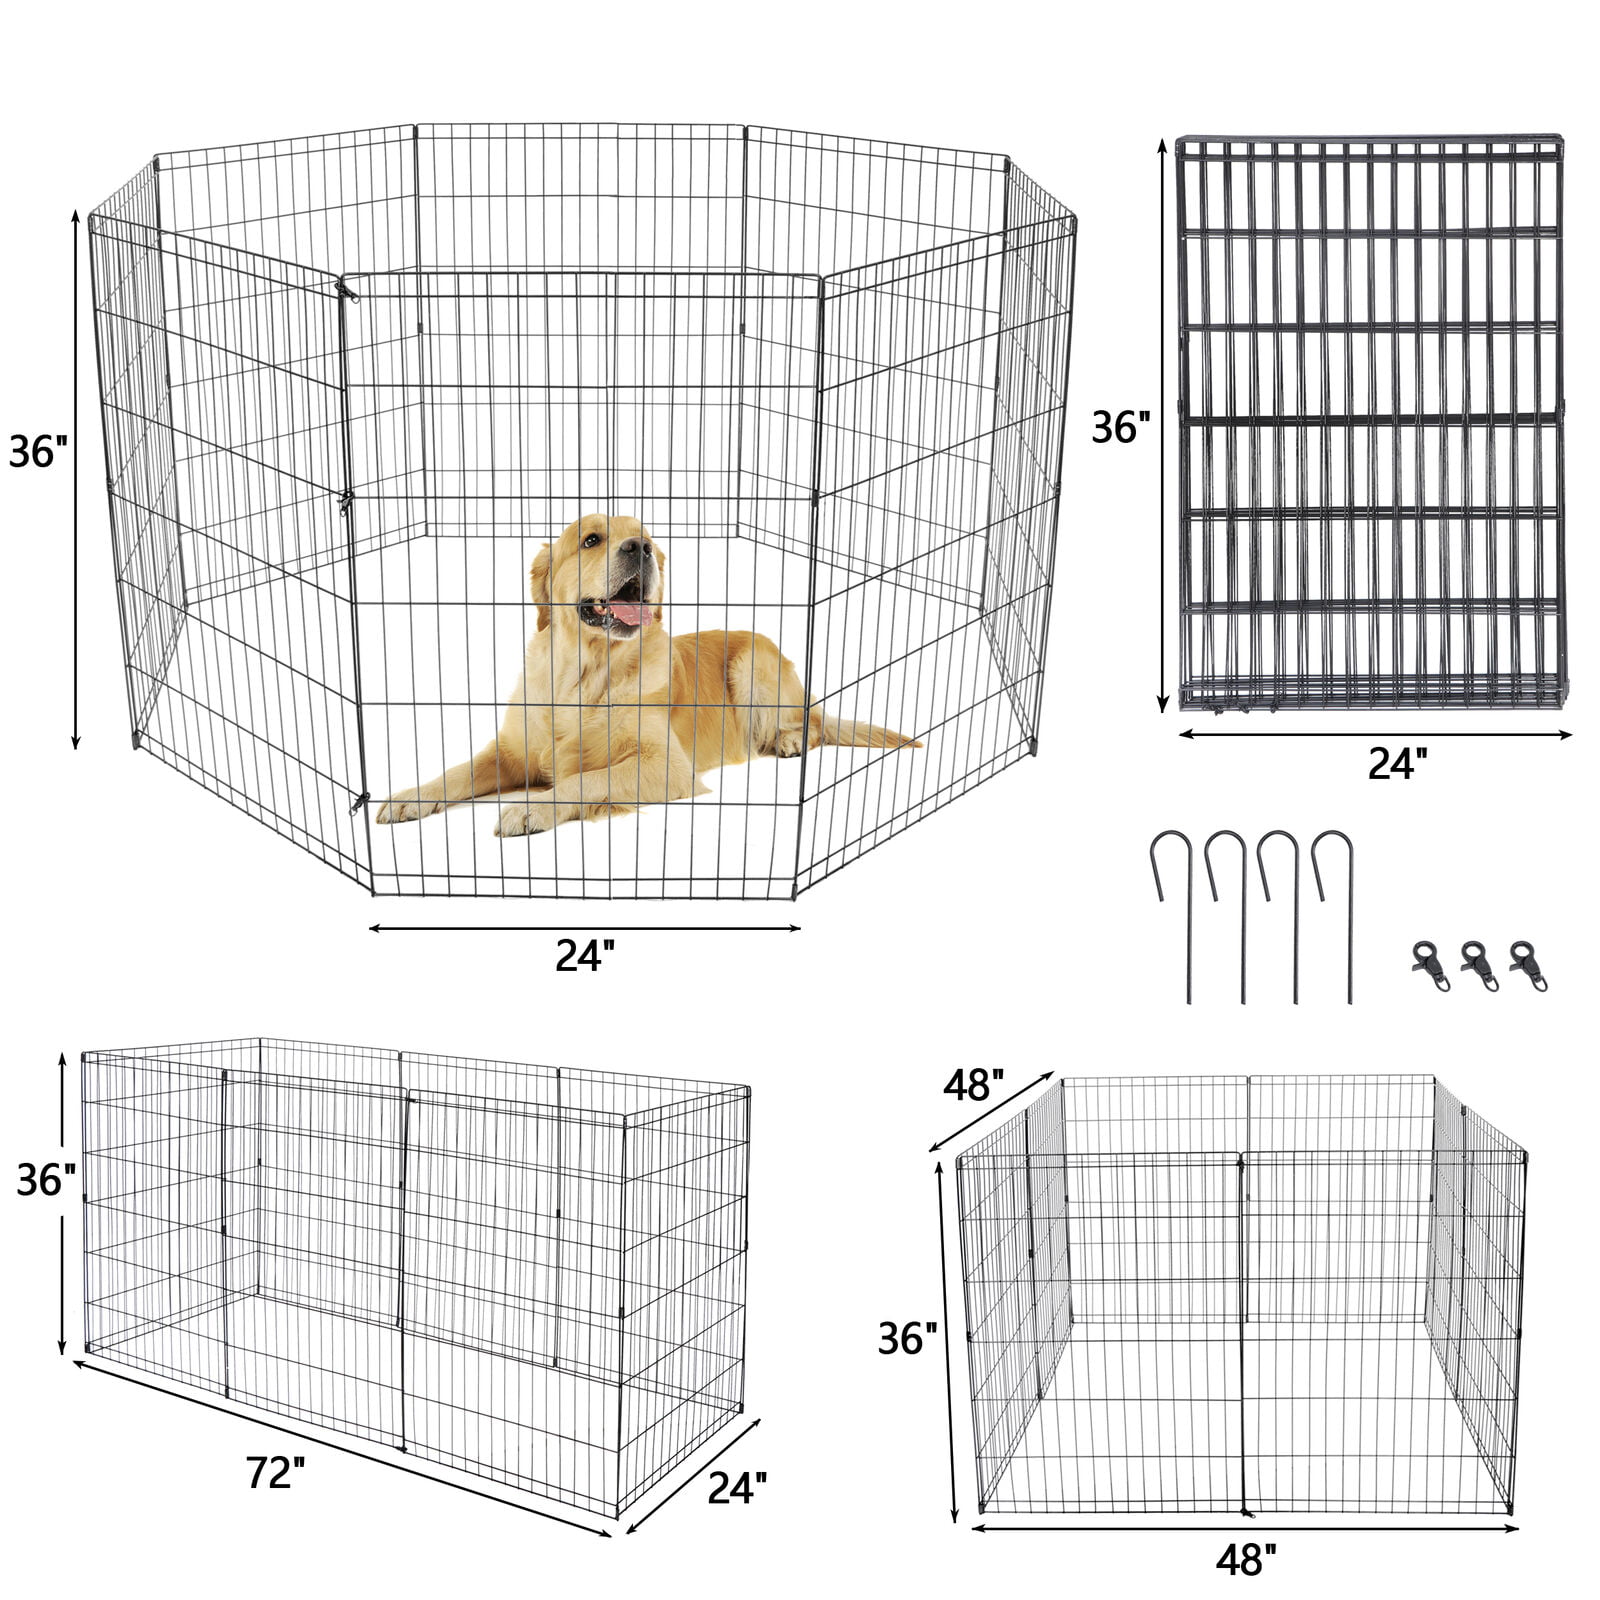 ZENSTYLE 36 Inch 8 Panels Indoor Outdoor Dog Playpen Large Crate Fence Pet Play Pen Exercise Cage